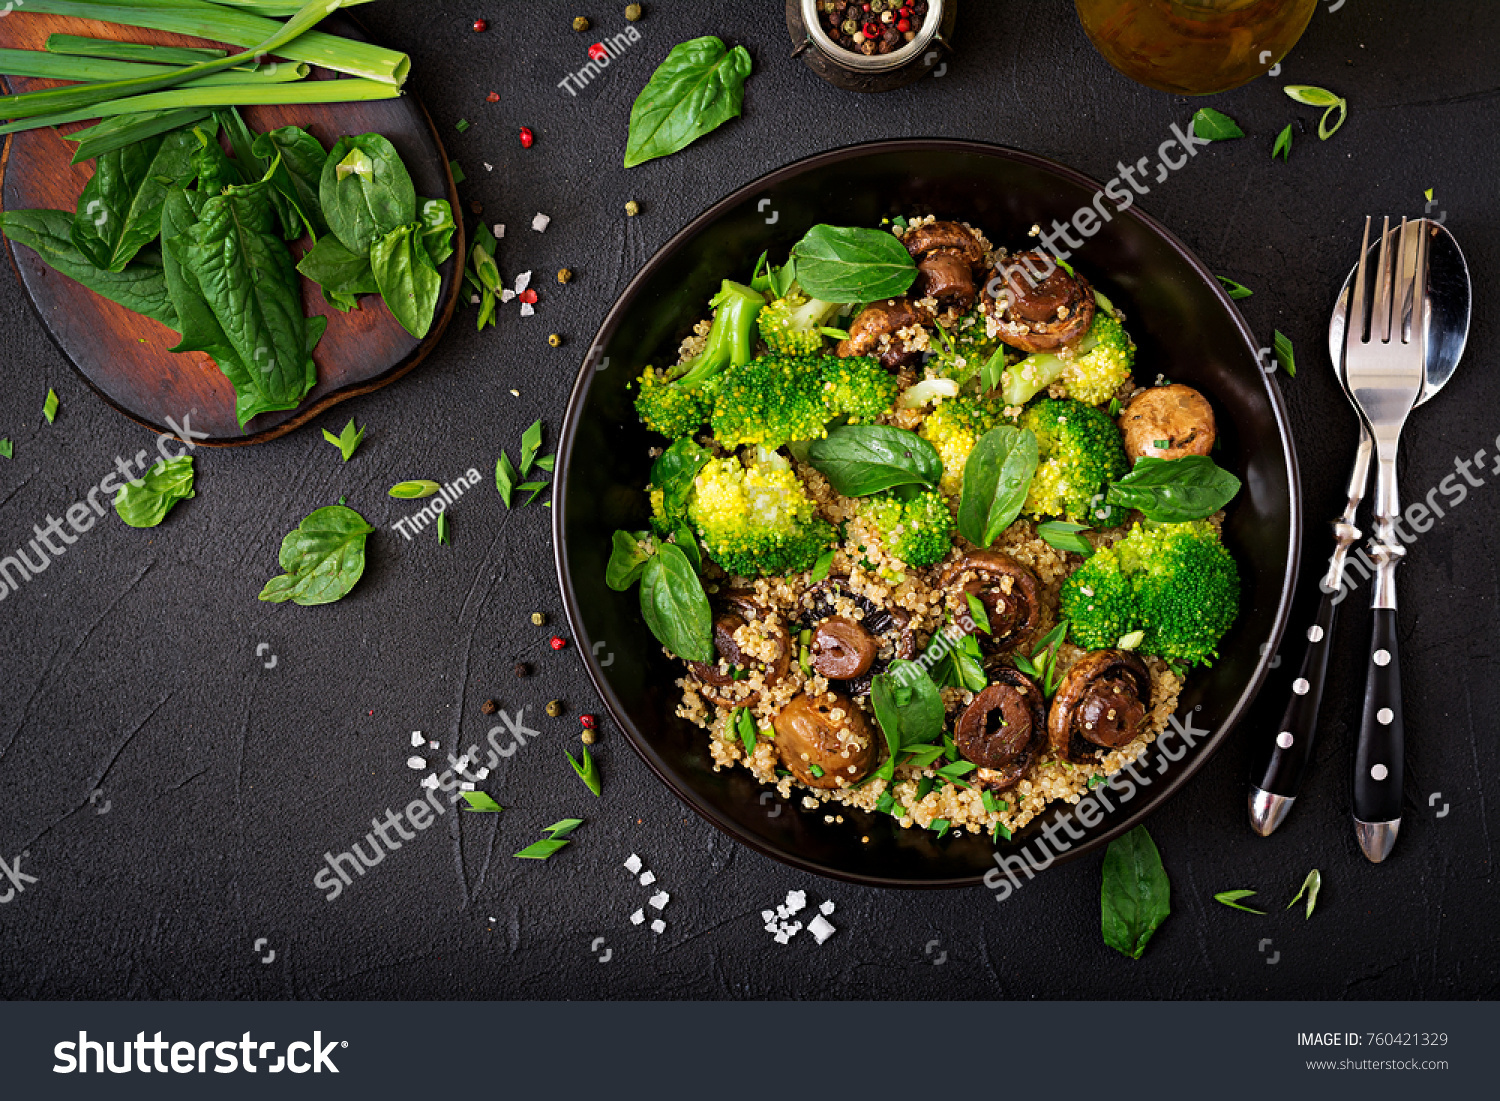 Dietary menu. Healthy vegan salad of vegetables - broccoli, mushrooms, spinach and quinoa in a bowl. Flat lay. Top view #760421329